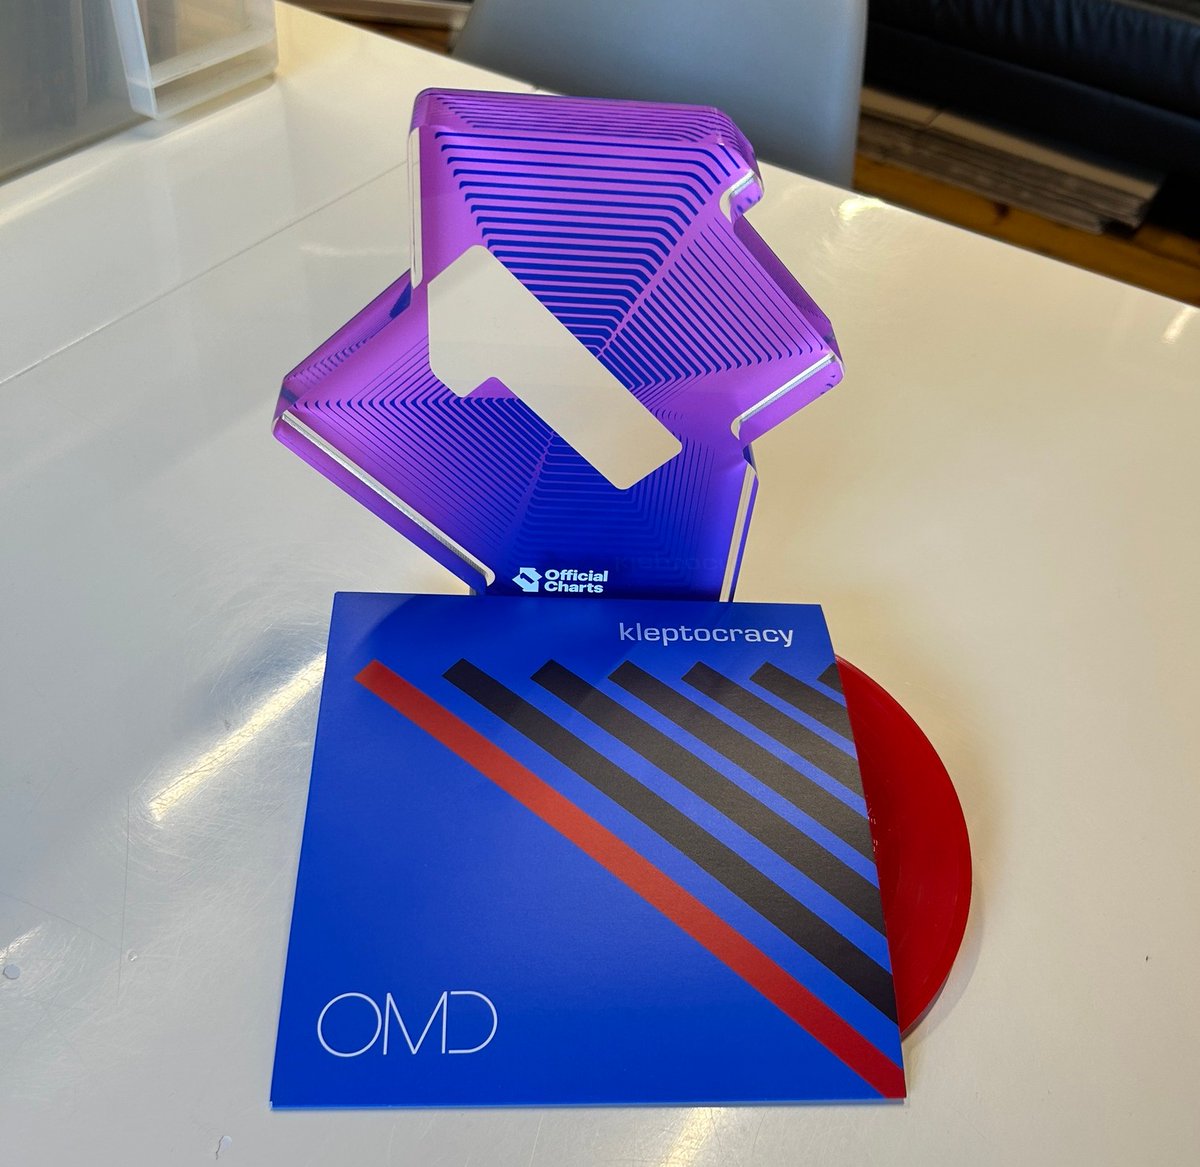 We're thrilled that Kleptocracy has charted at #1 in the Official Vinyl Singles Chart! Read the full chart here: officialcharts.com/charts/vinyl-s… Final copies of the 7': omd.uk.com @officialcharts